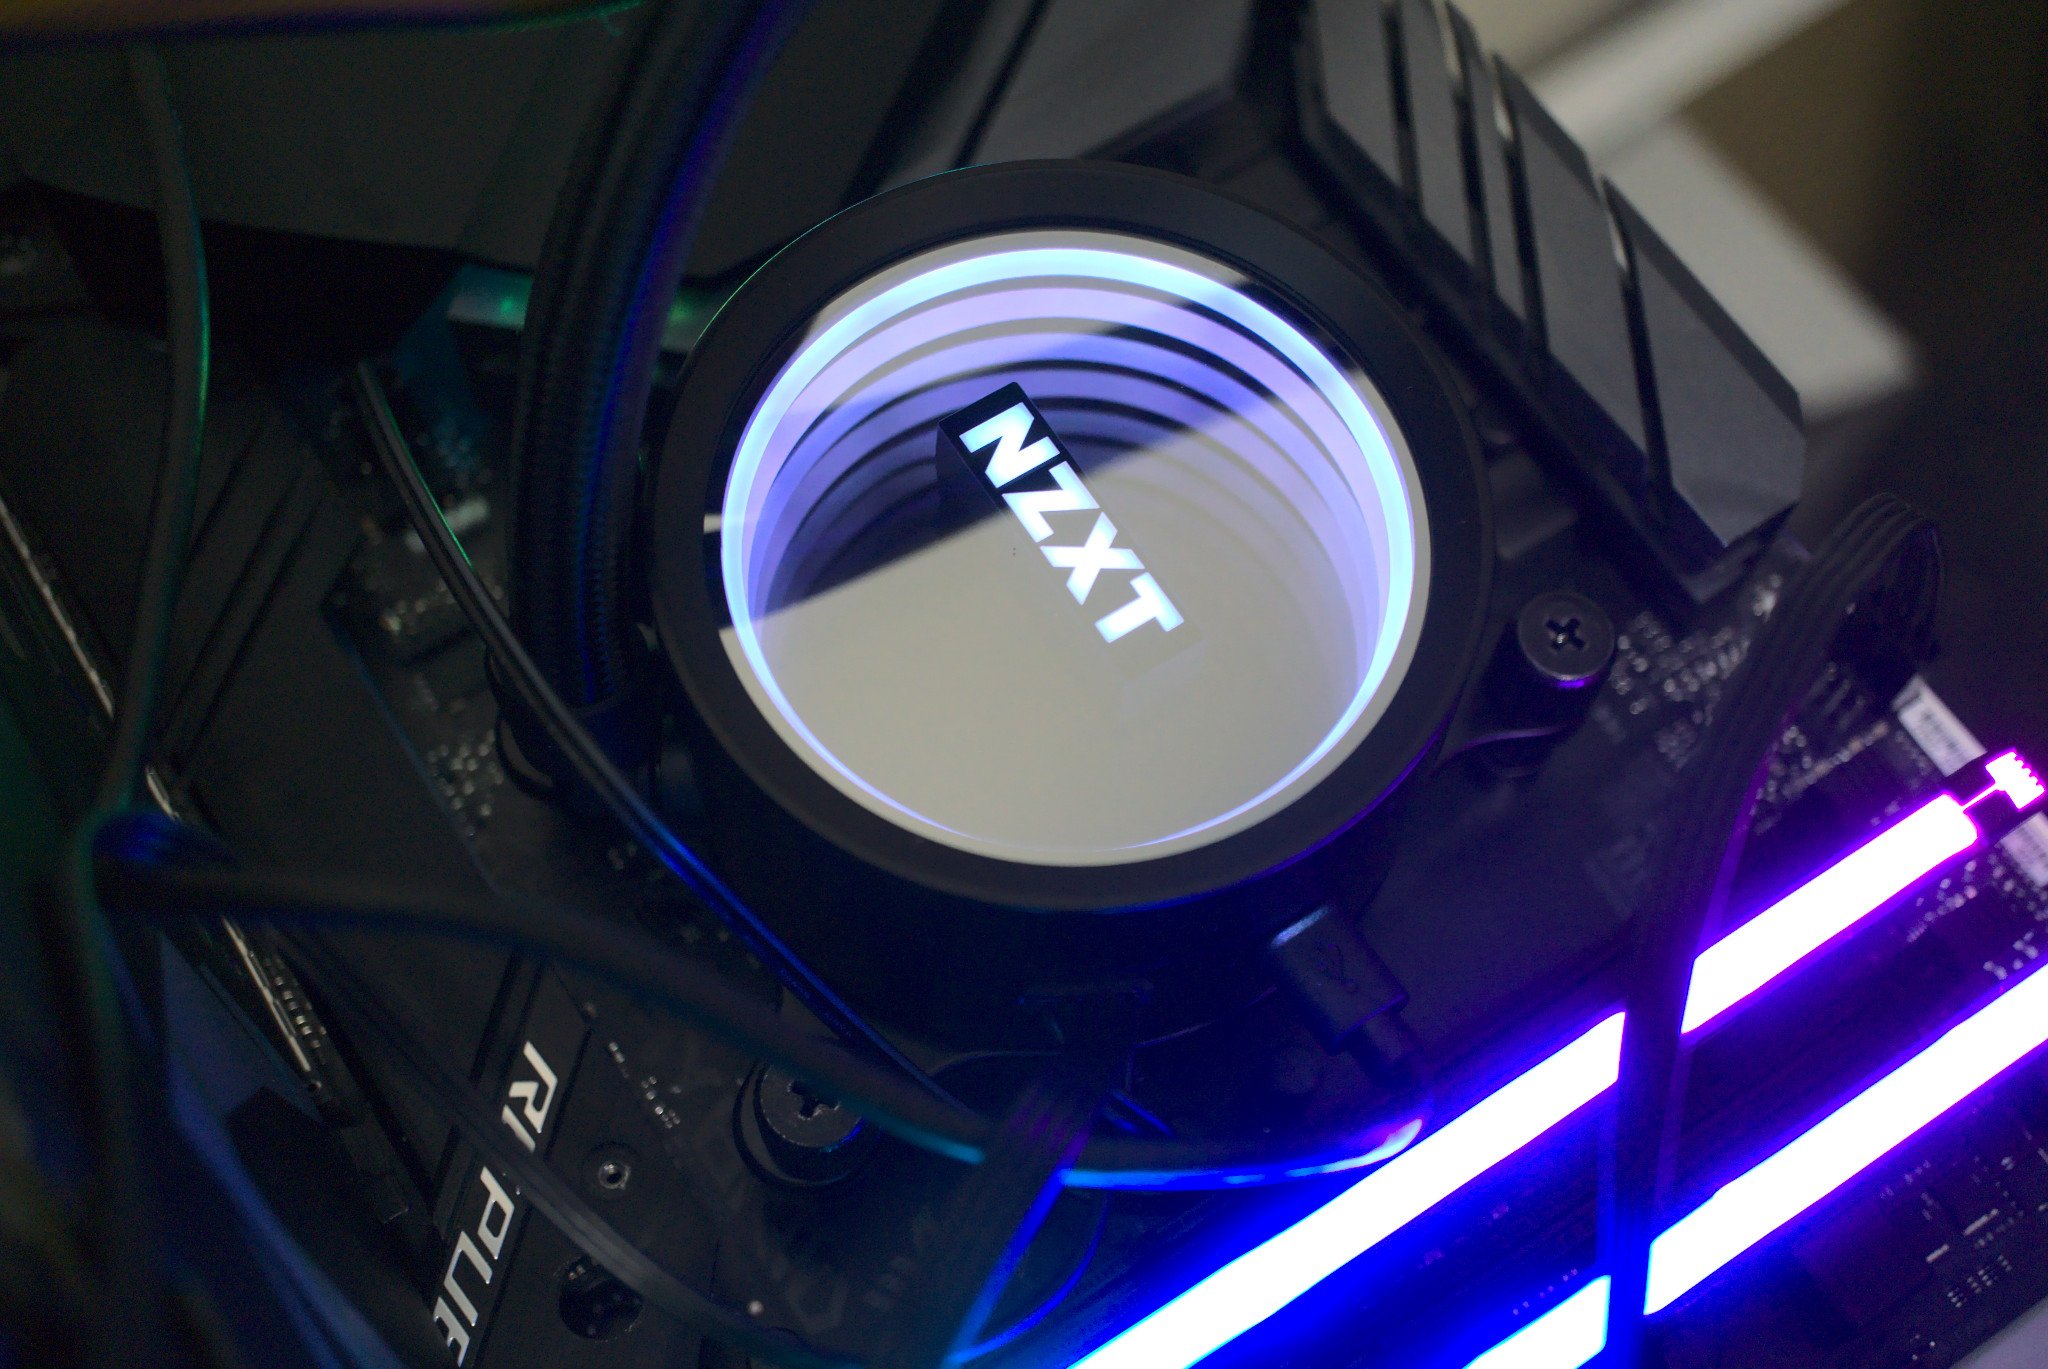 NZXT Kraken X73 RGB AIO review: Exceptional cooling performance with